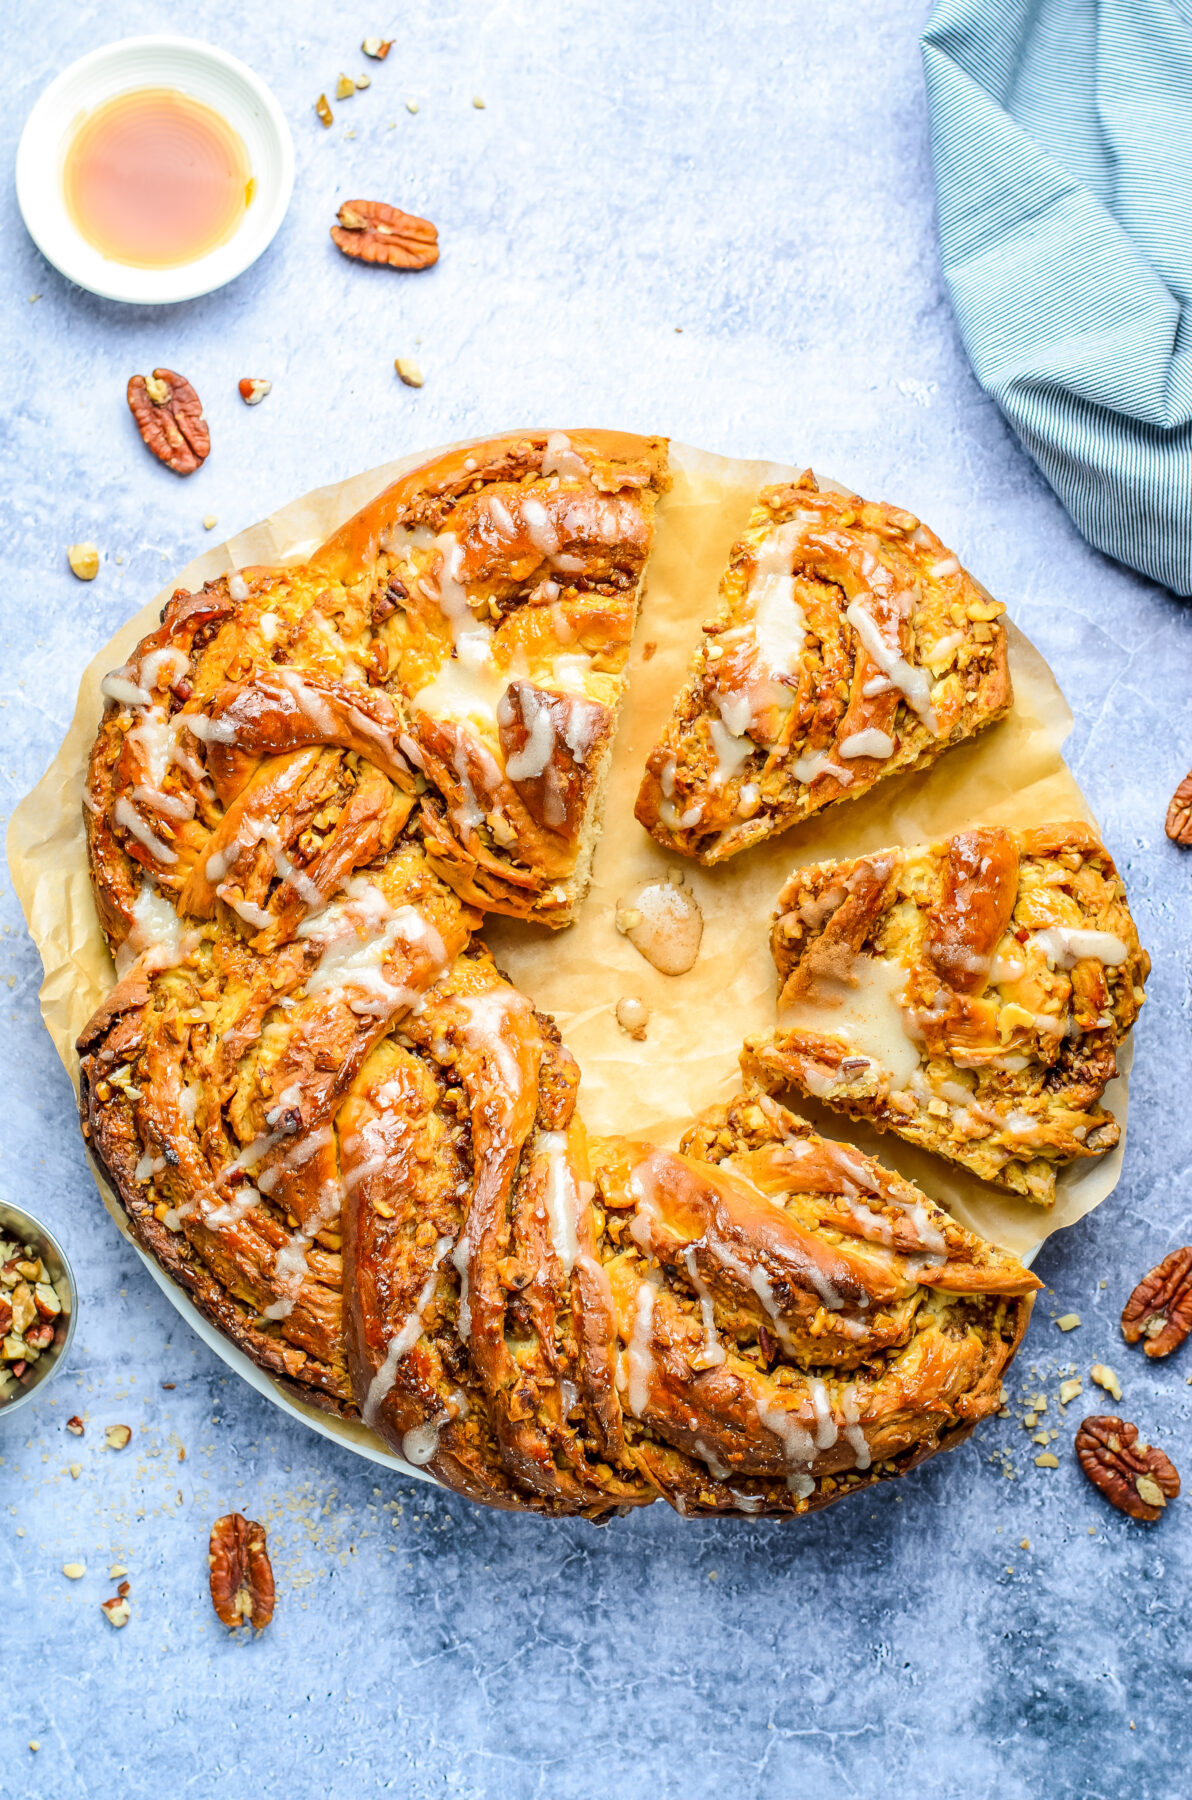 This Maple Pecan Wreath Bread is made up of soft and fluffy yeast dough with a cinnamon pecan filling, all topped with a sweet maple glaze.